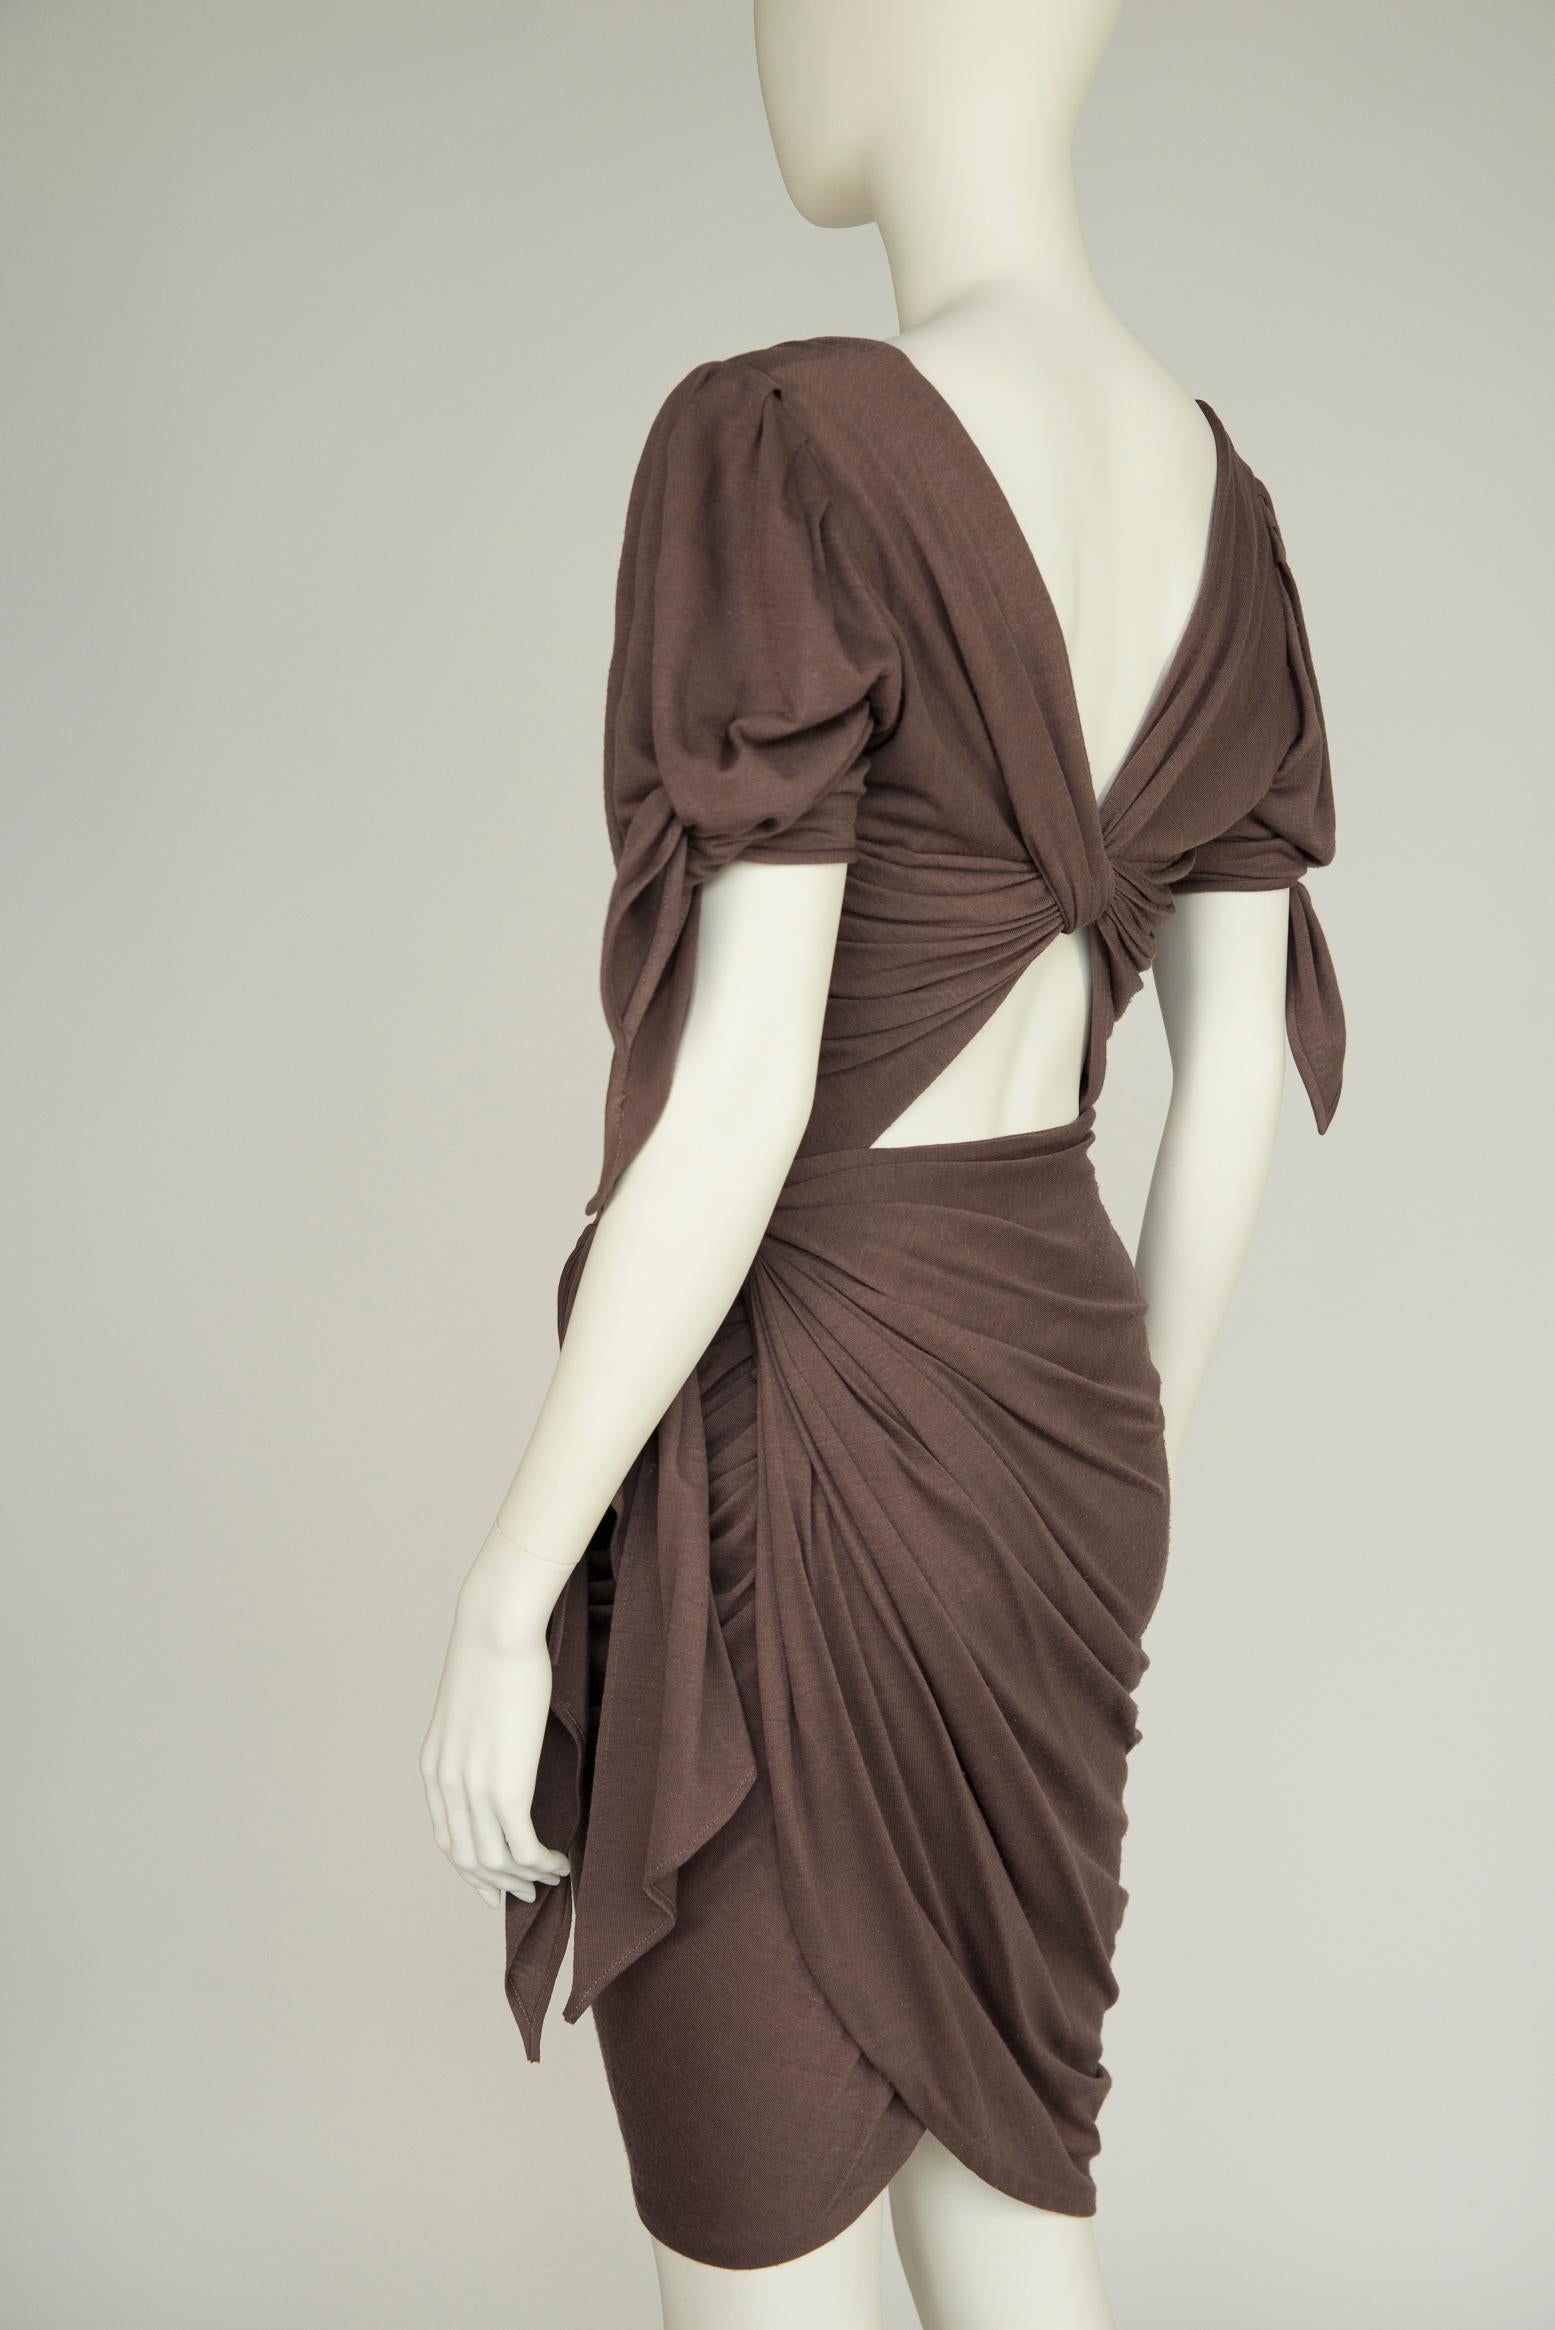 Emanuel Ungaro Draped Knotted Cut-Out Cocktail Dress, Circa 1985 For Sale 6